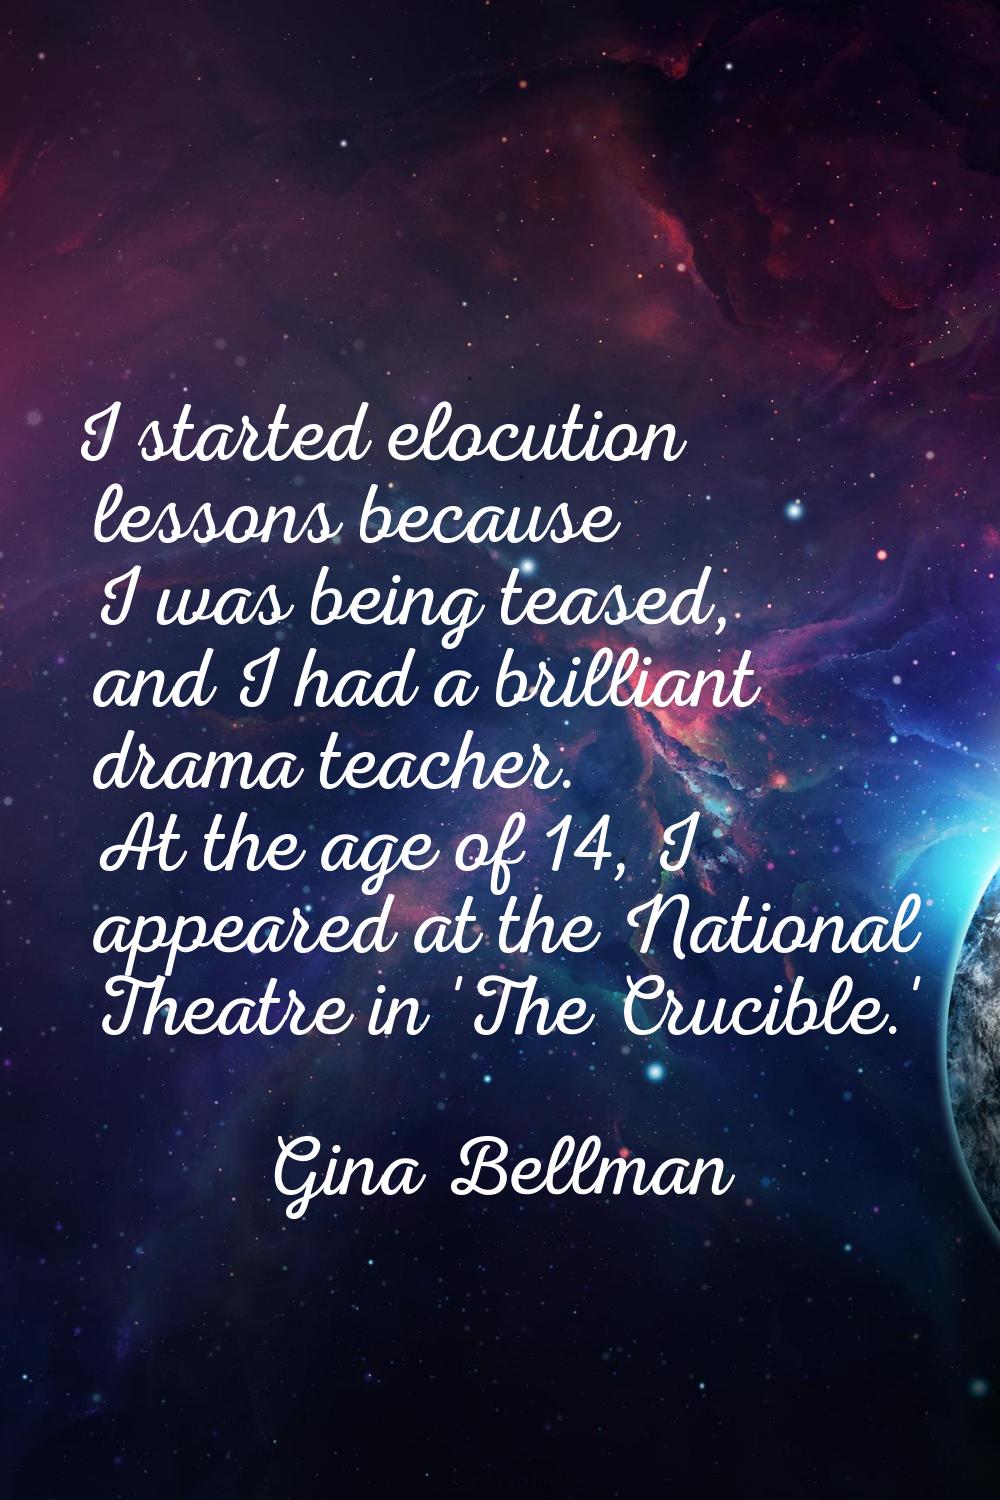 I started elocution lessons because I was being teased, and I had a brilliant drama teacher. At the